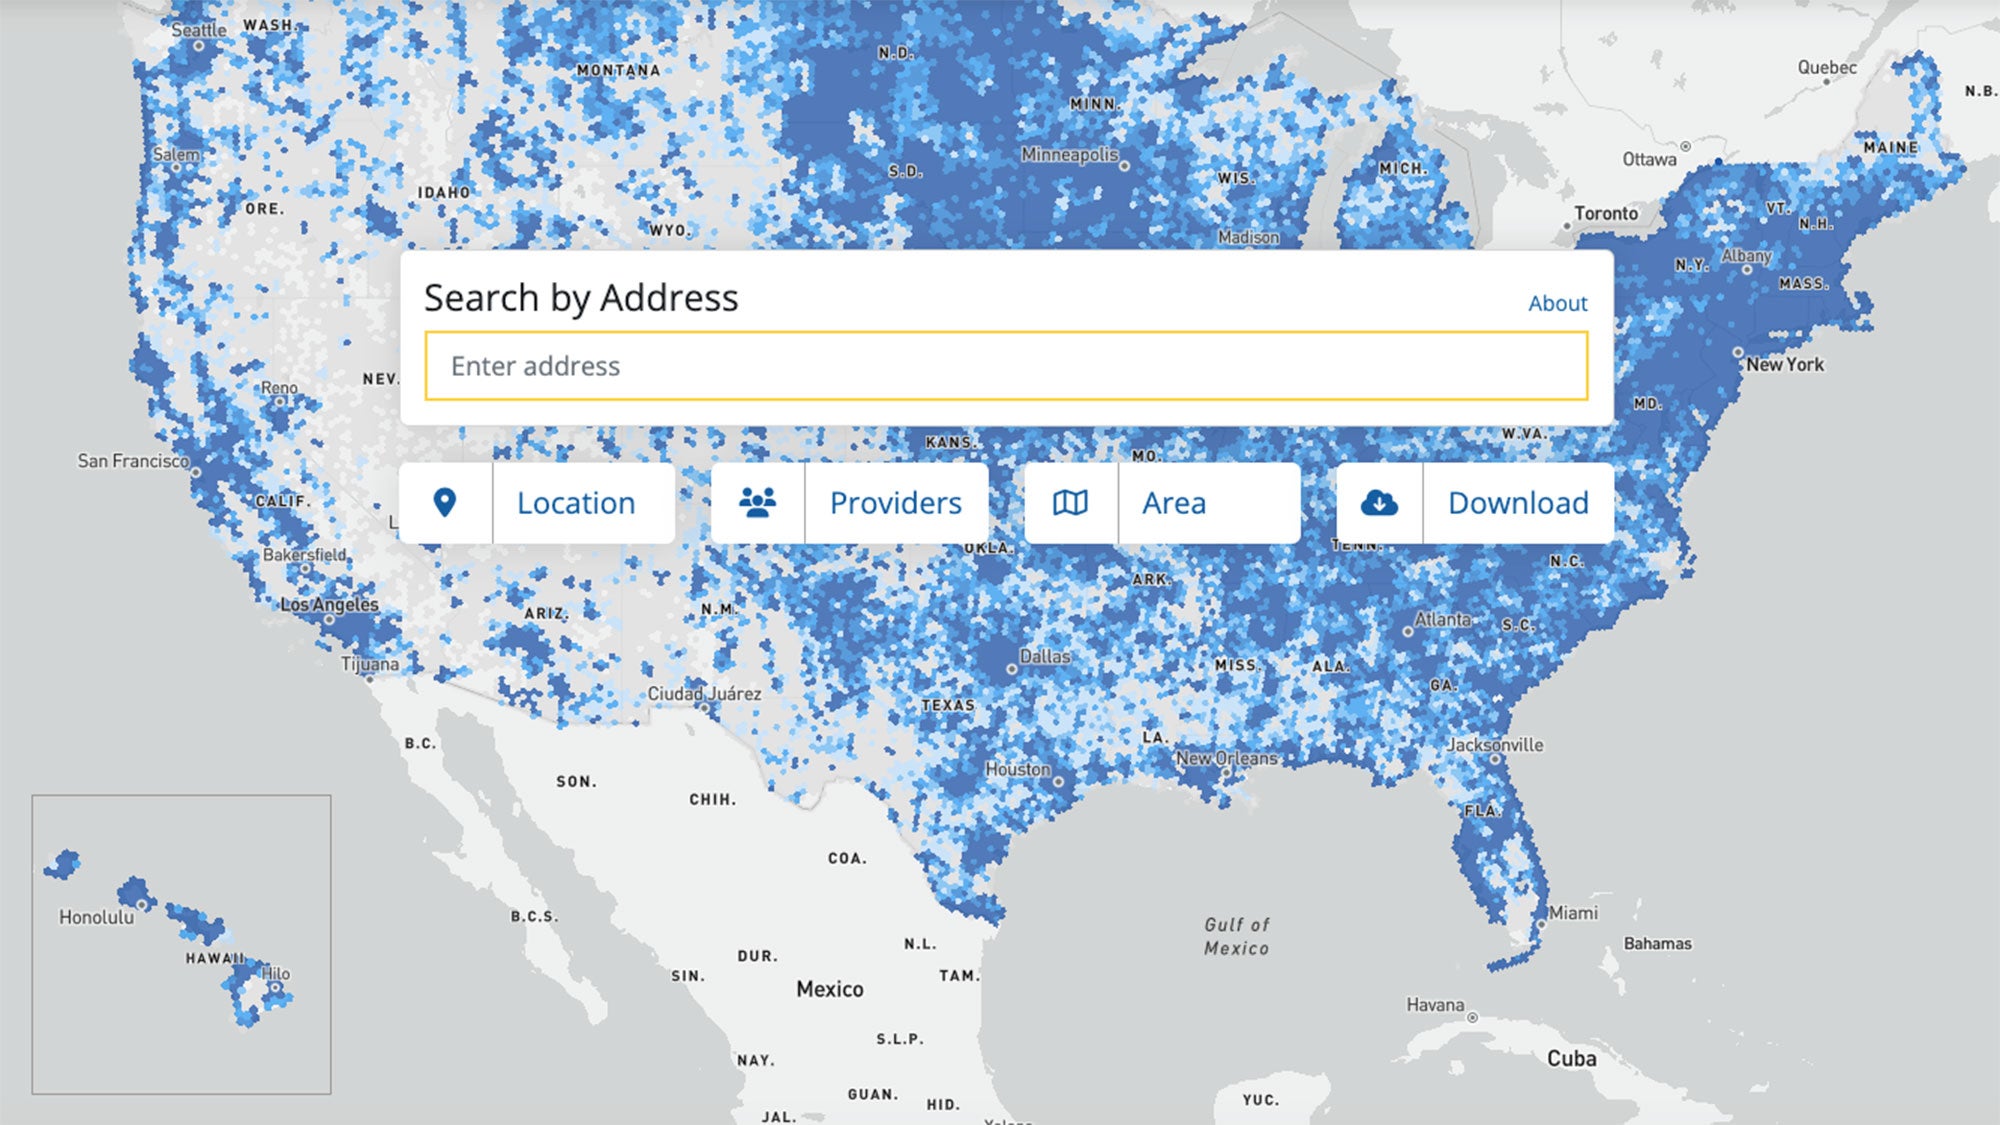 8.3 million places in the US still don't have access to broadband internet